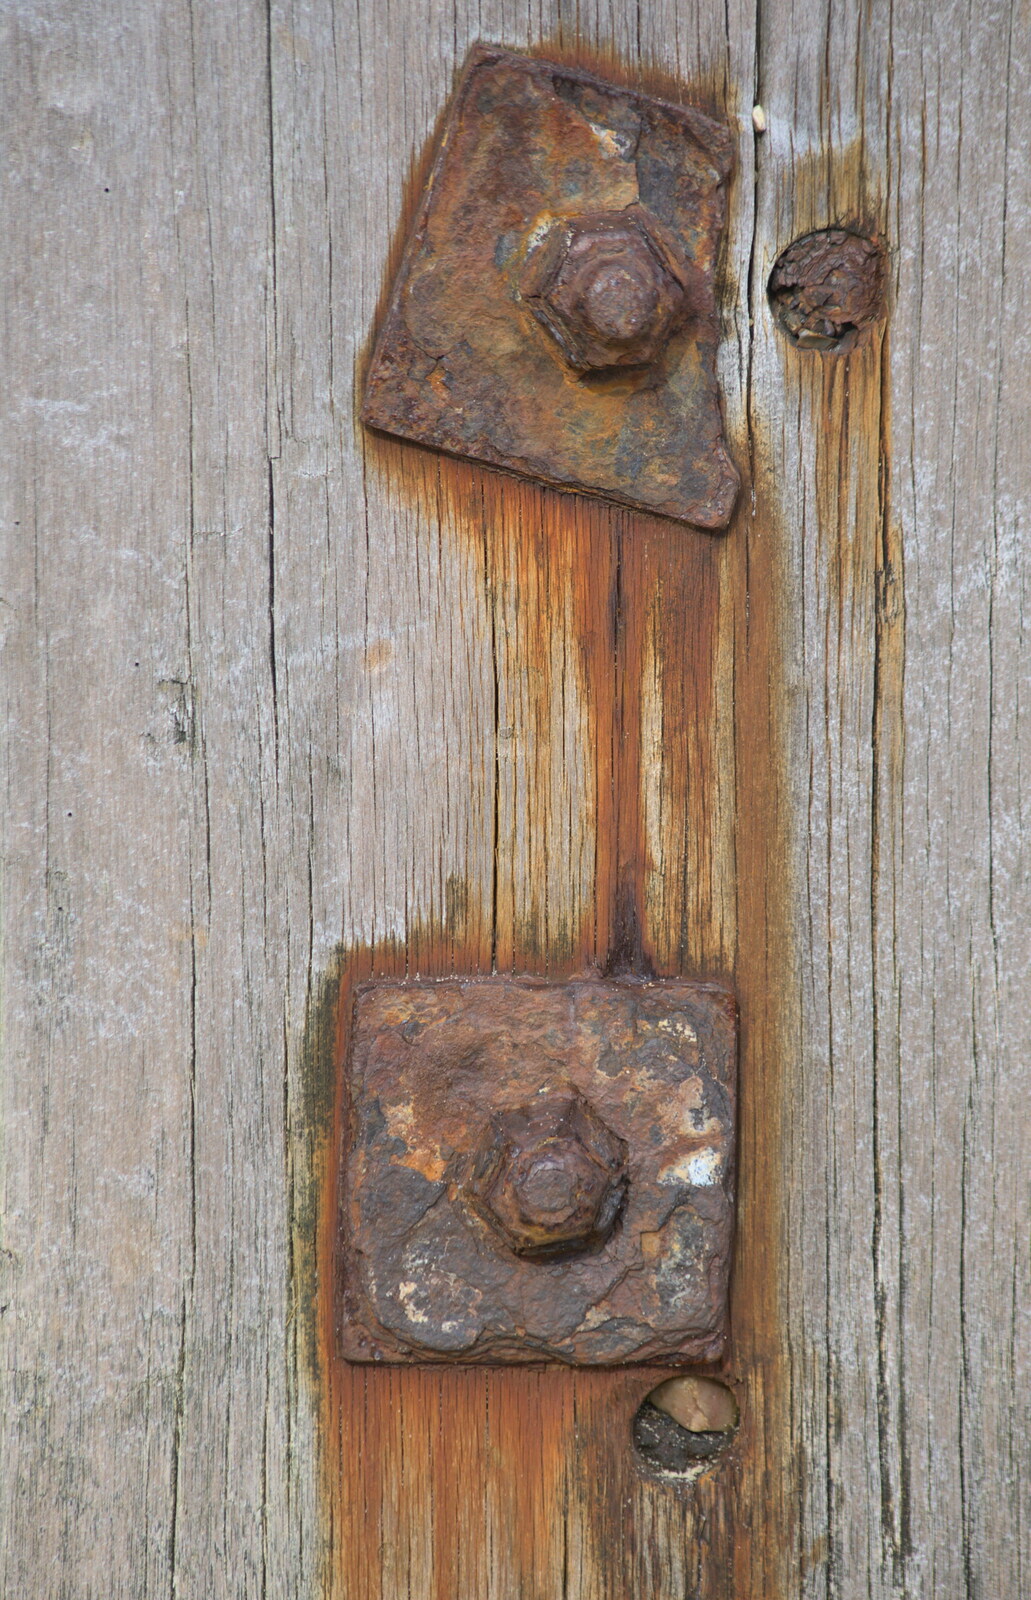 Rusting iron in wood from On The Beach Again, Southwold, Suffolk - 12th October 2014